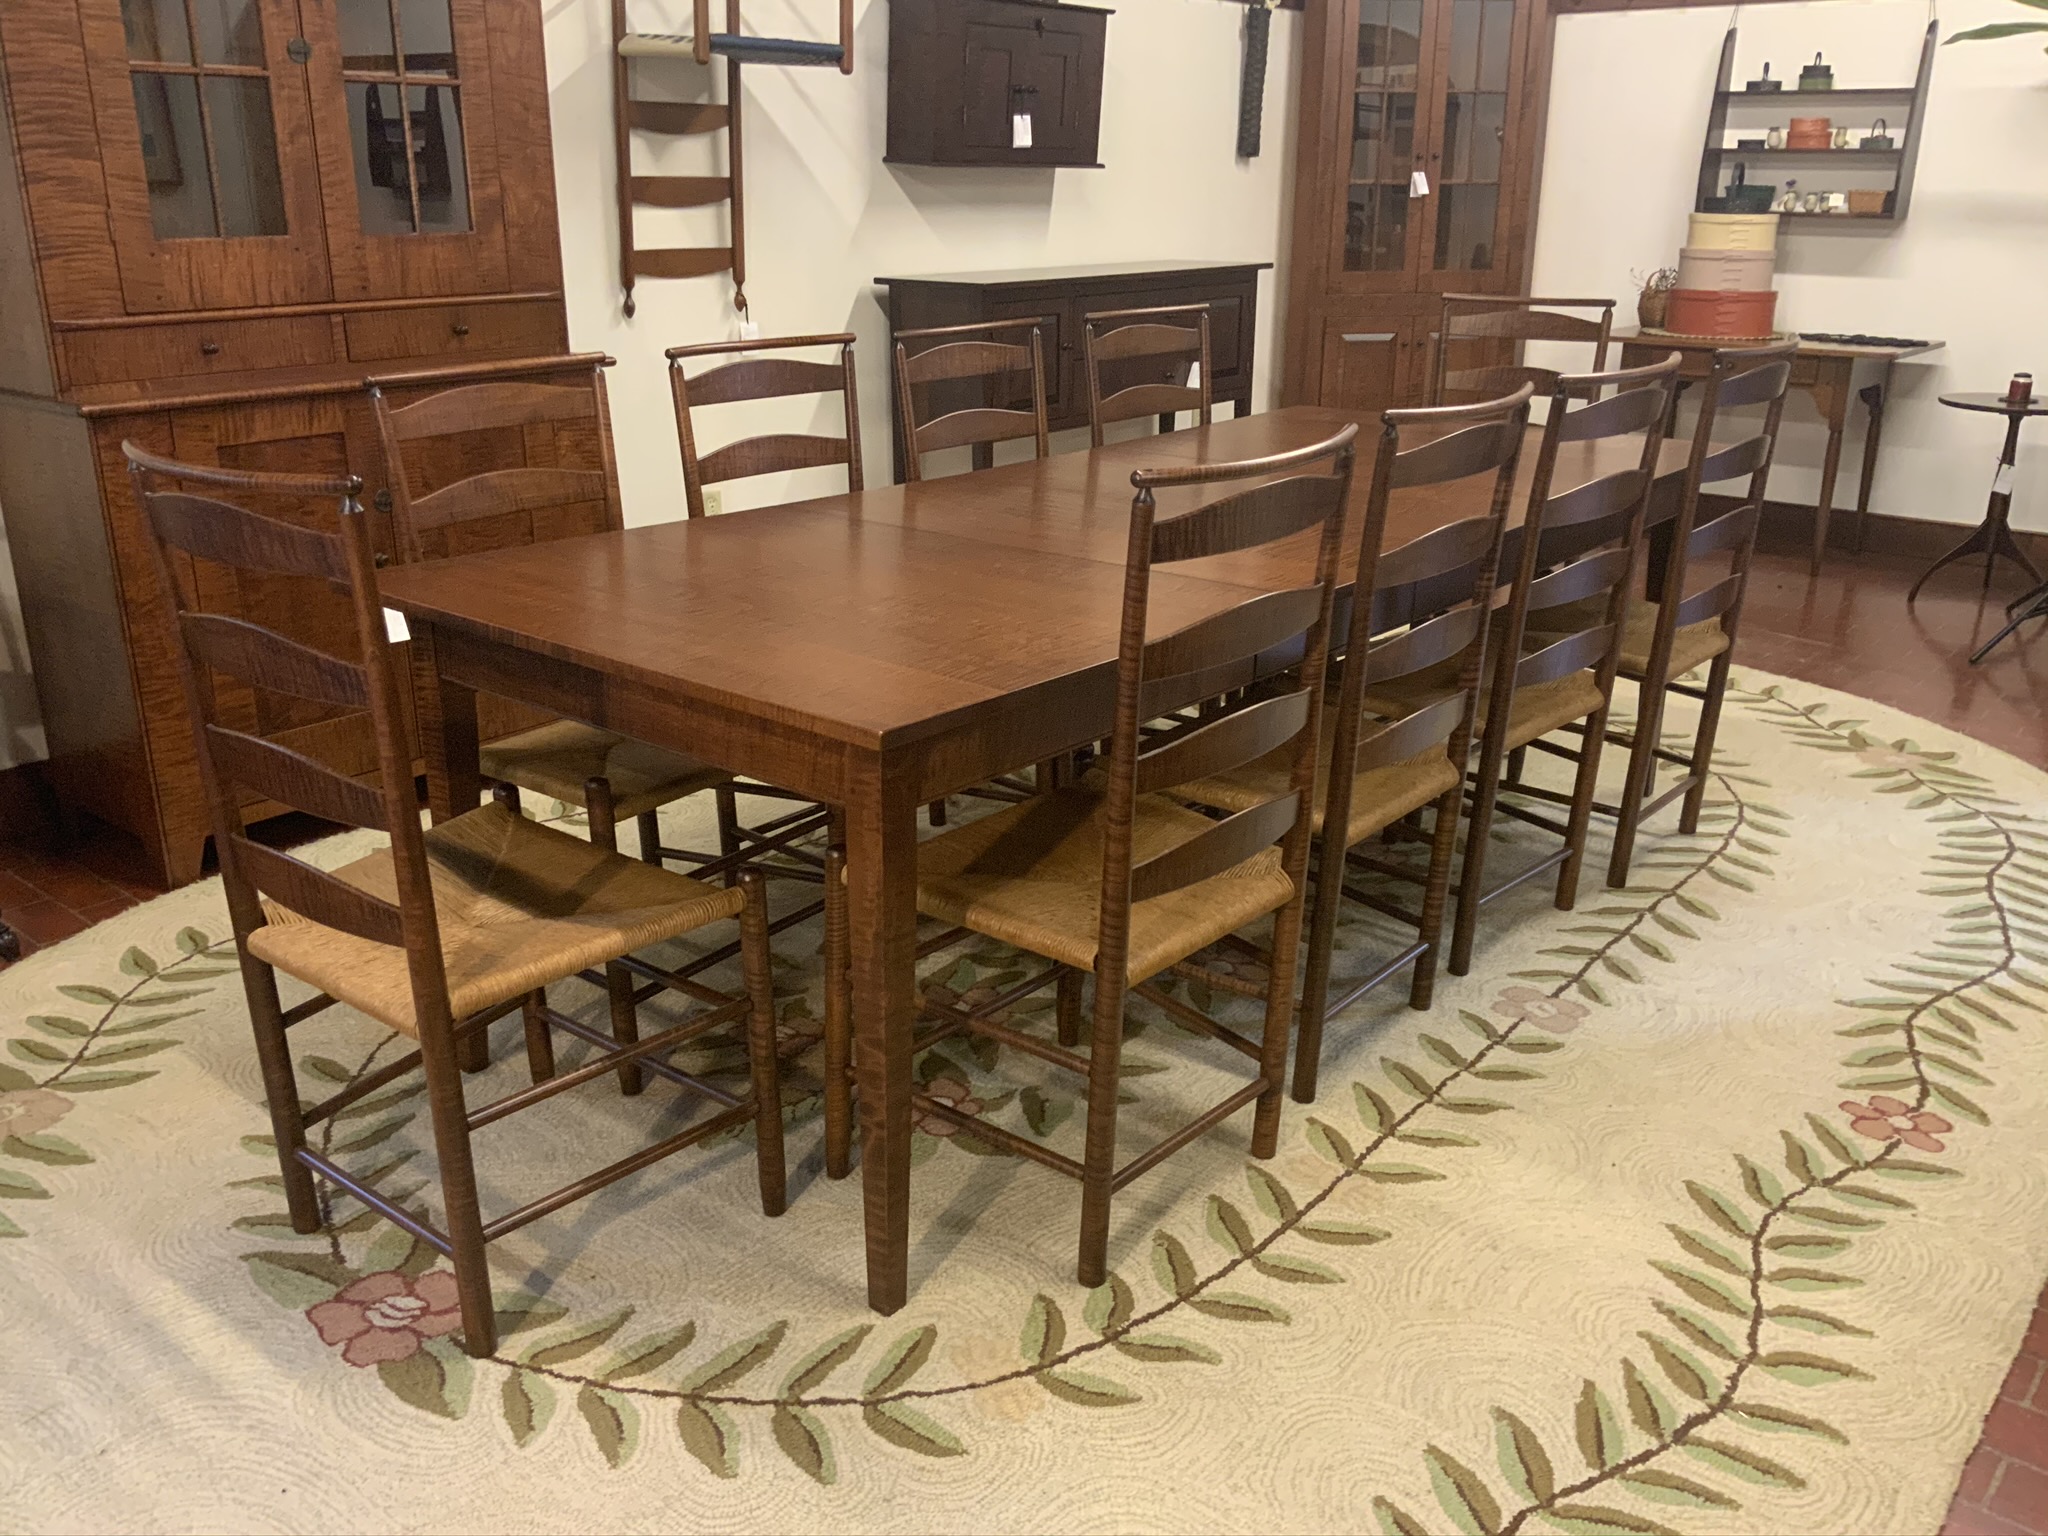 Tiger Maple Table 10 Chair Set, Maple Wood Dining Room Furniture